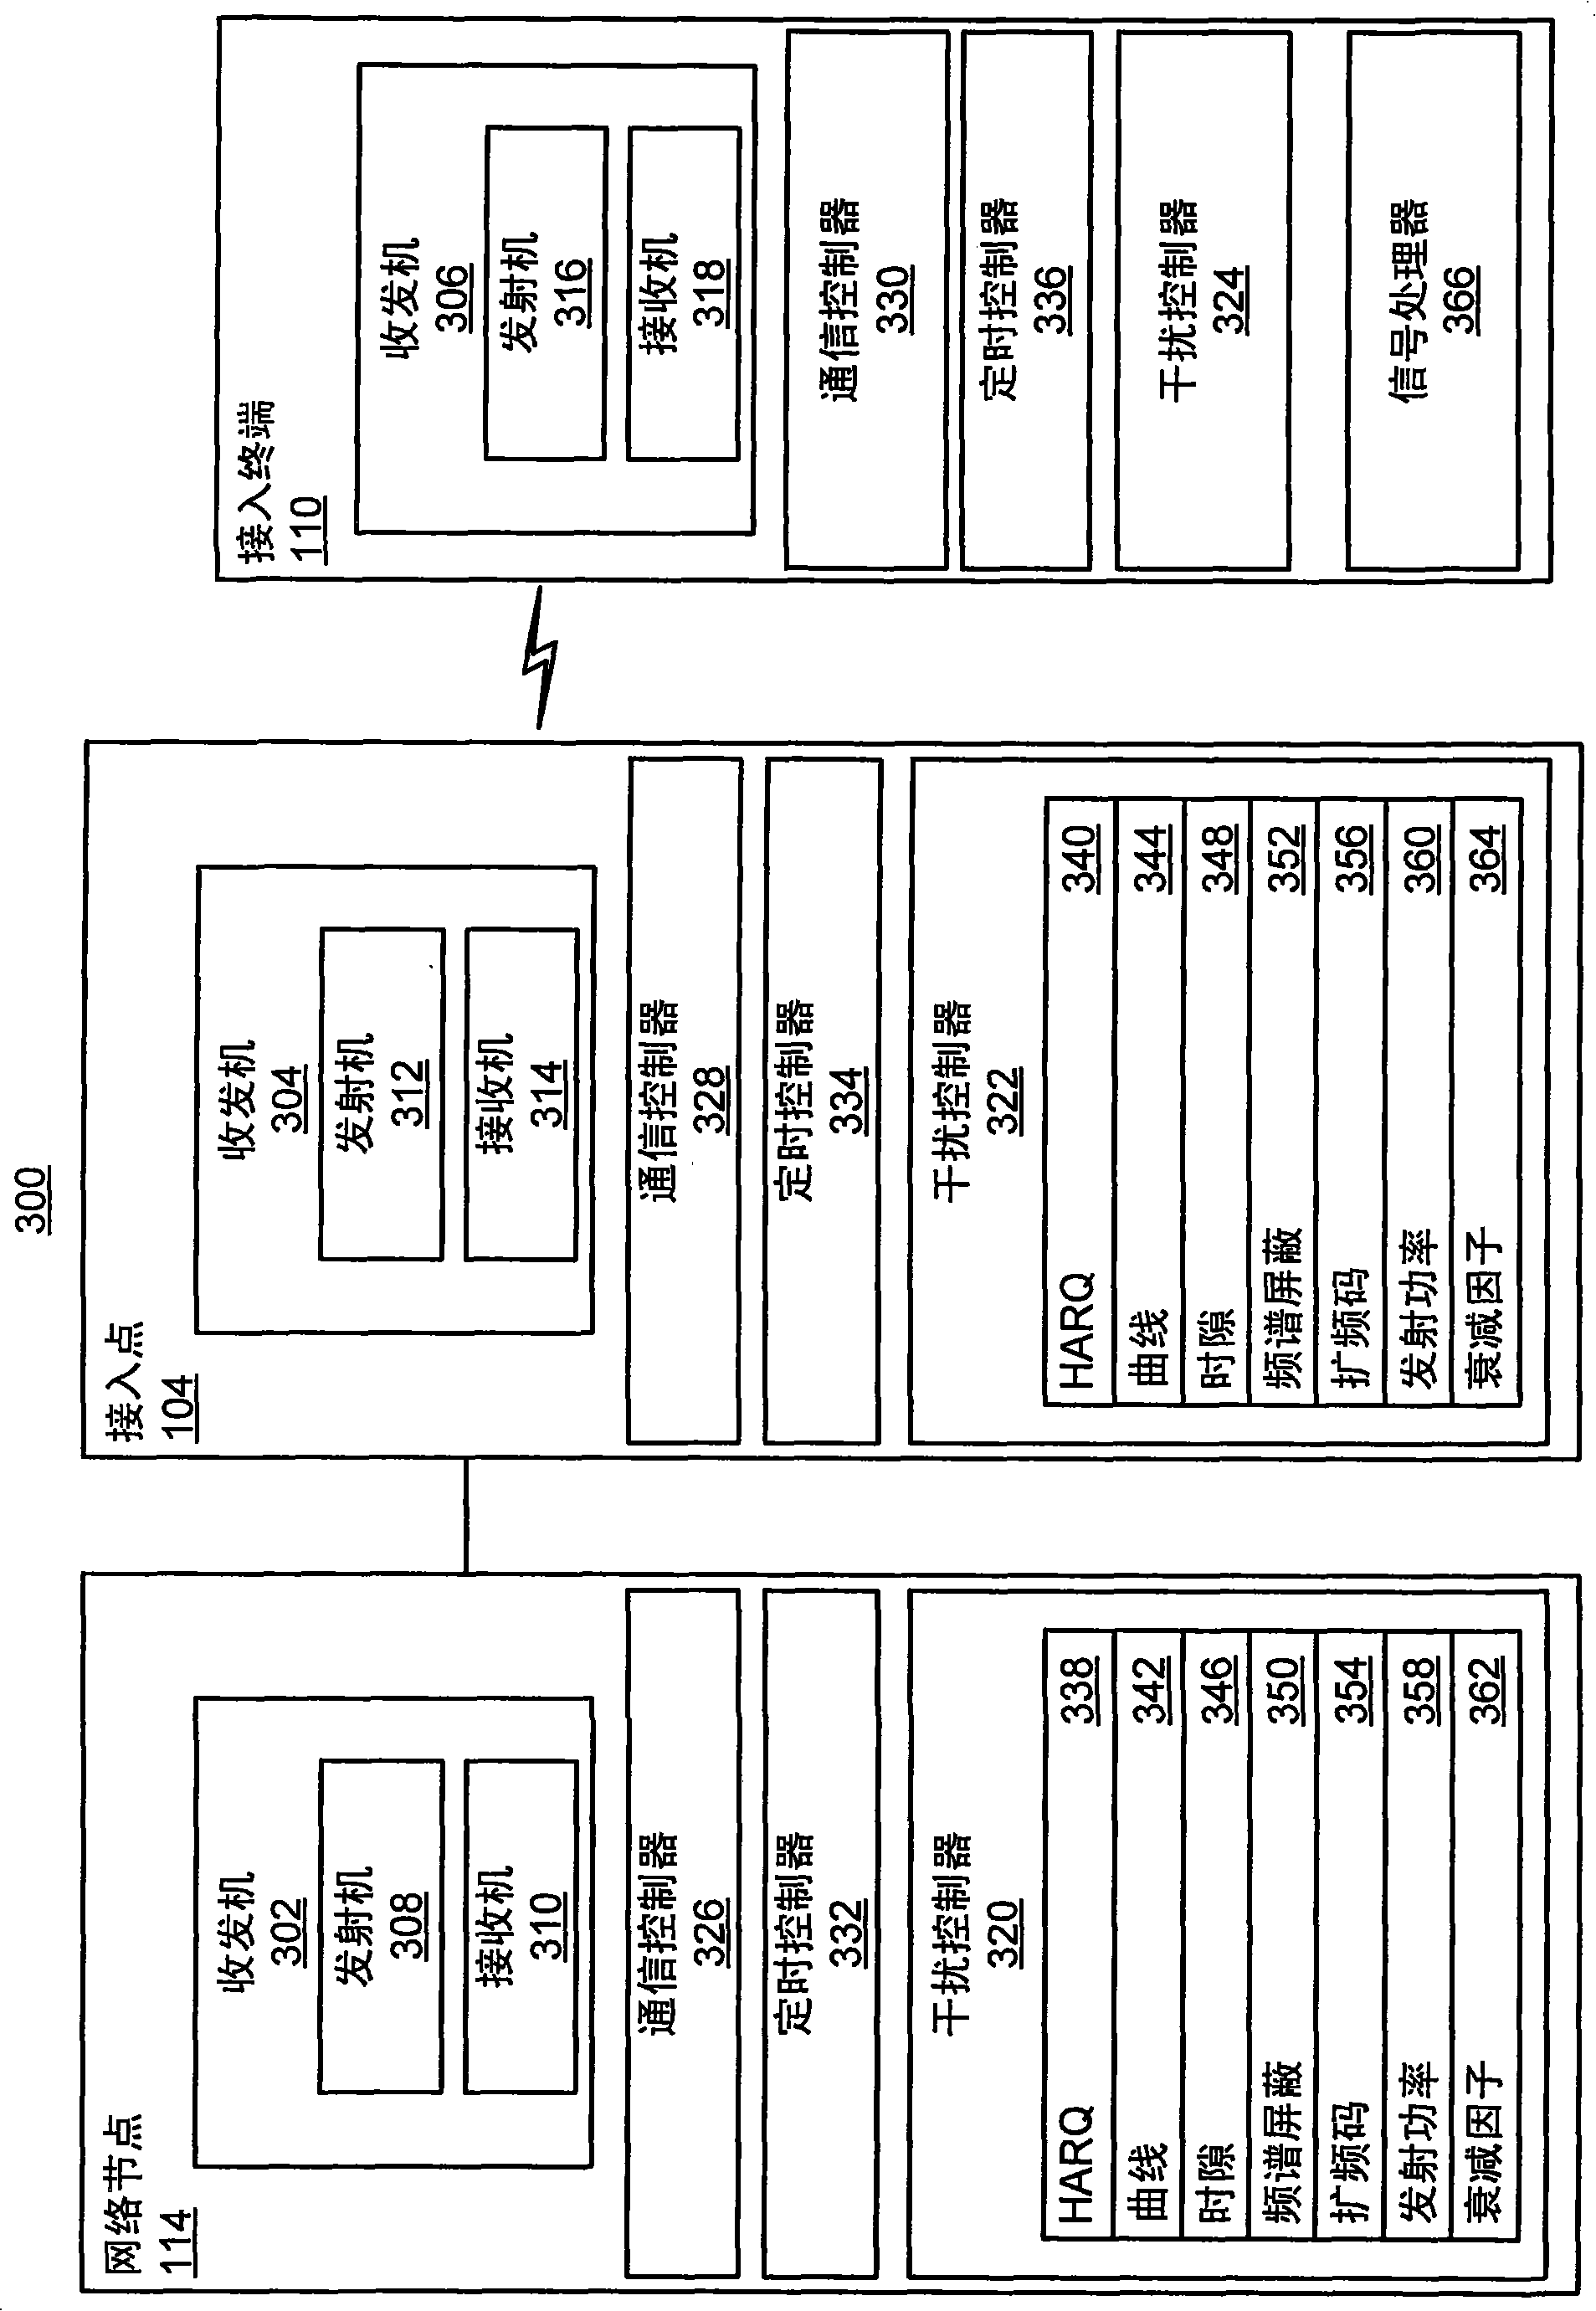 Interference management utilizing power control